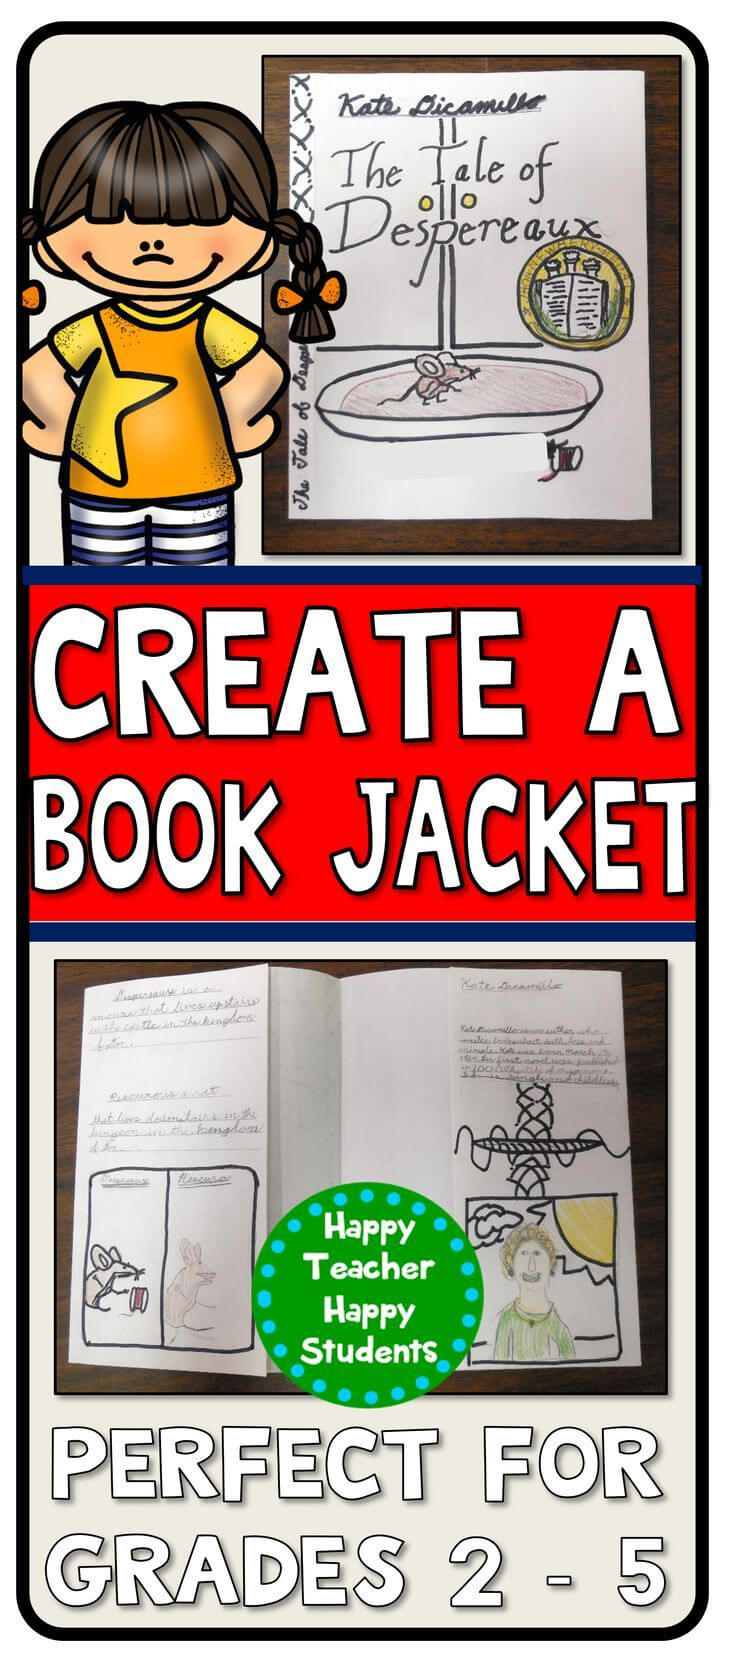 Book Jacket: Book Jacket Book Report – Writing, Art With Paper Bag Book Report Template